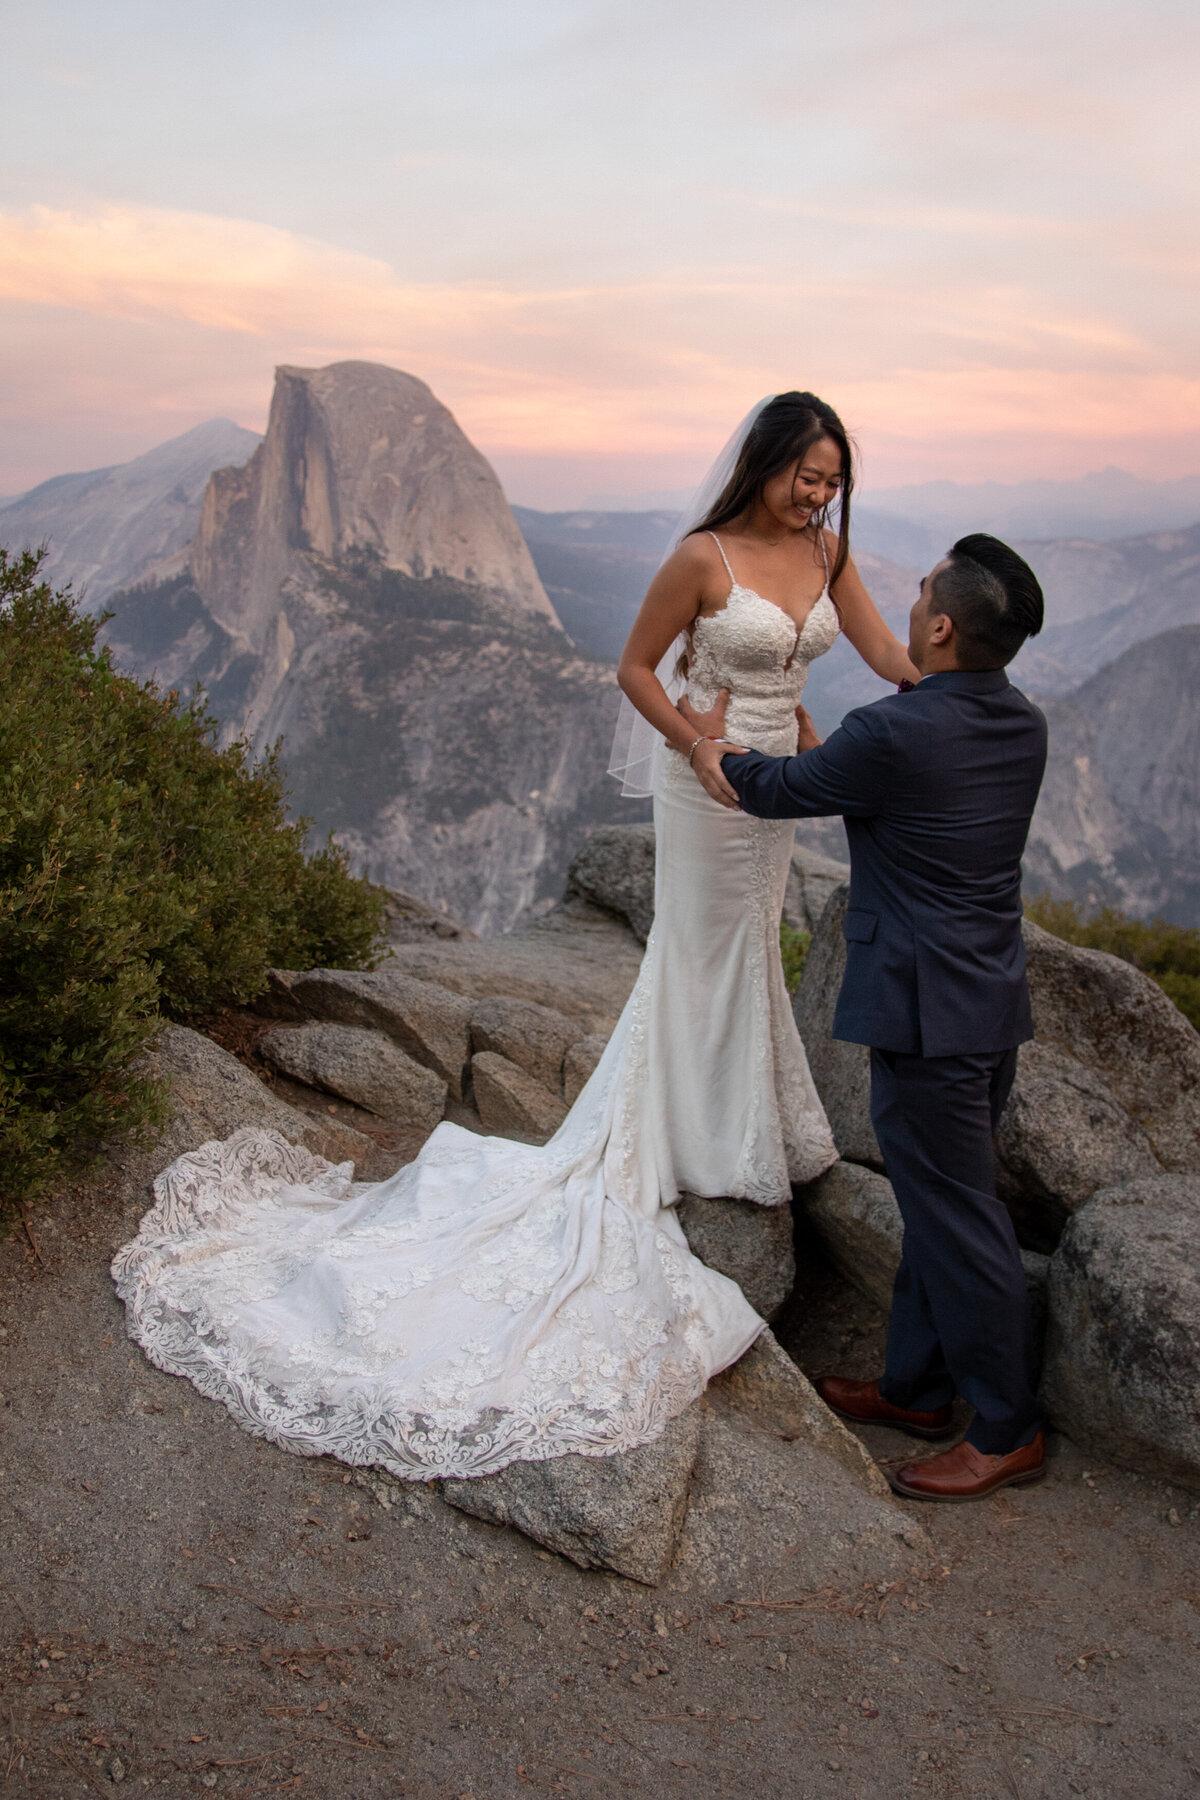 Groom helps his bride down from a rock after their Yosemite  Elopement.